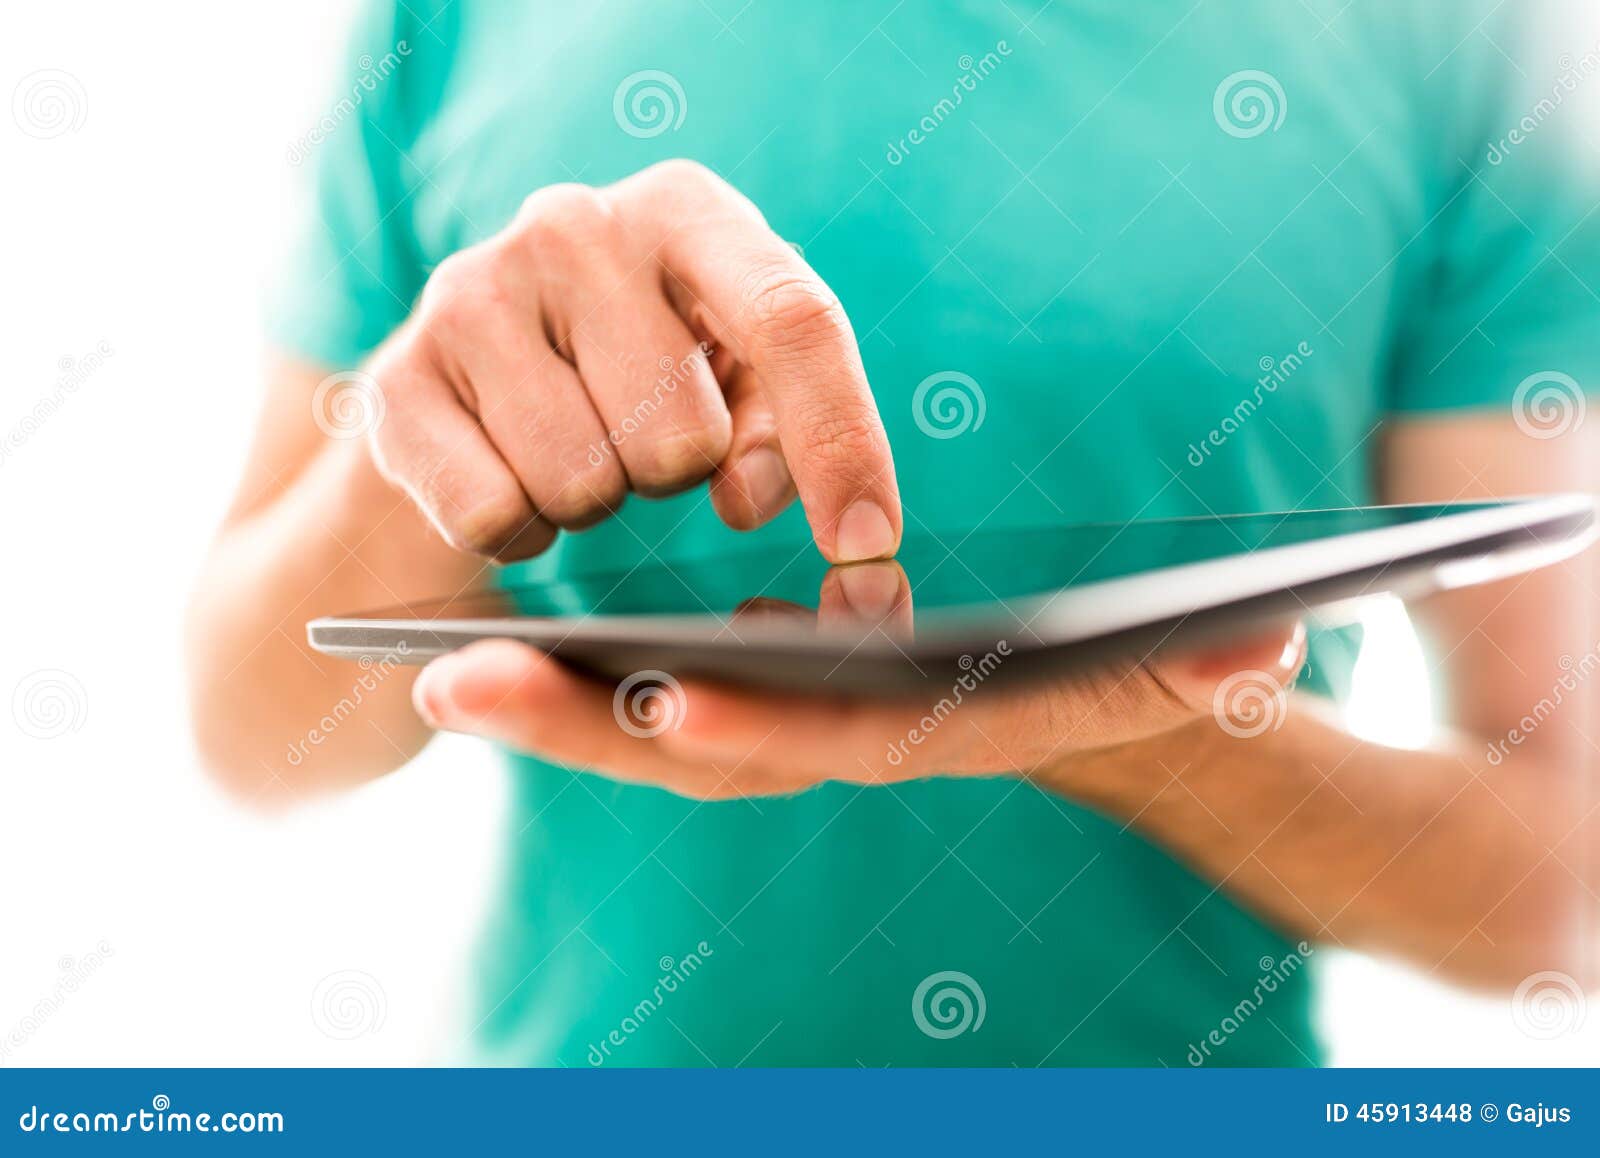 young person navigating a tablet